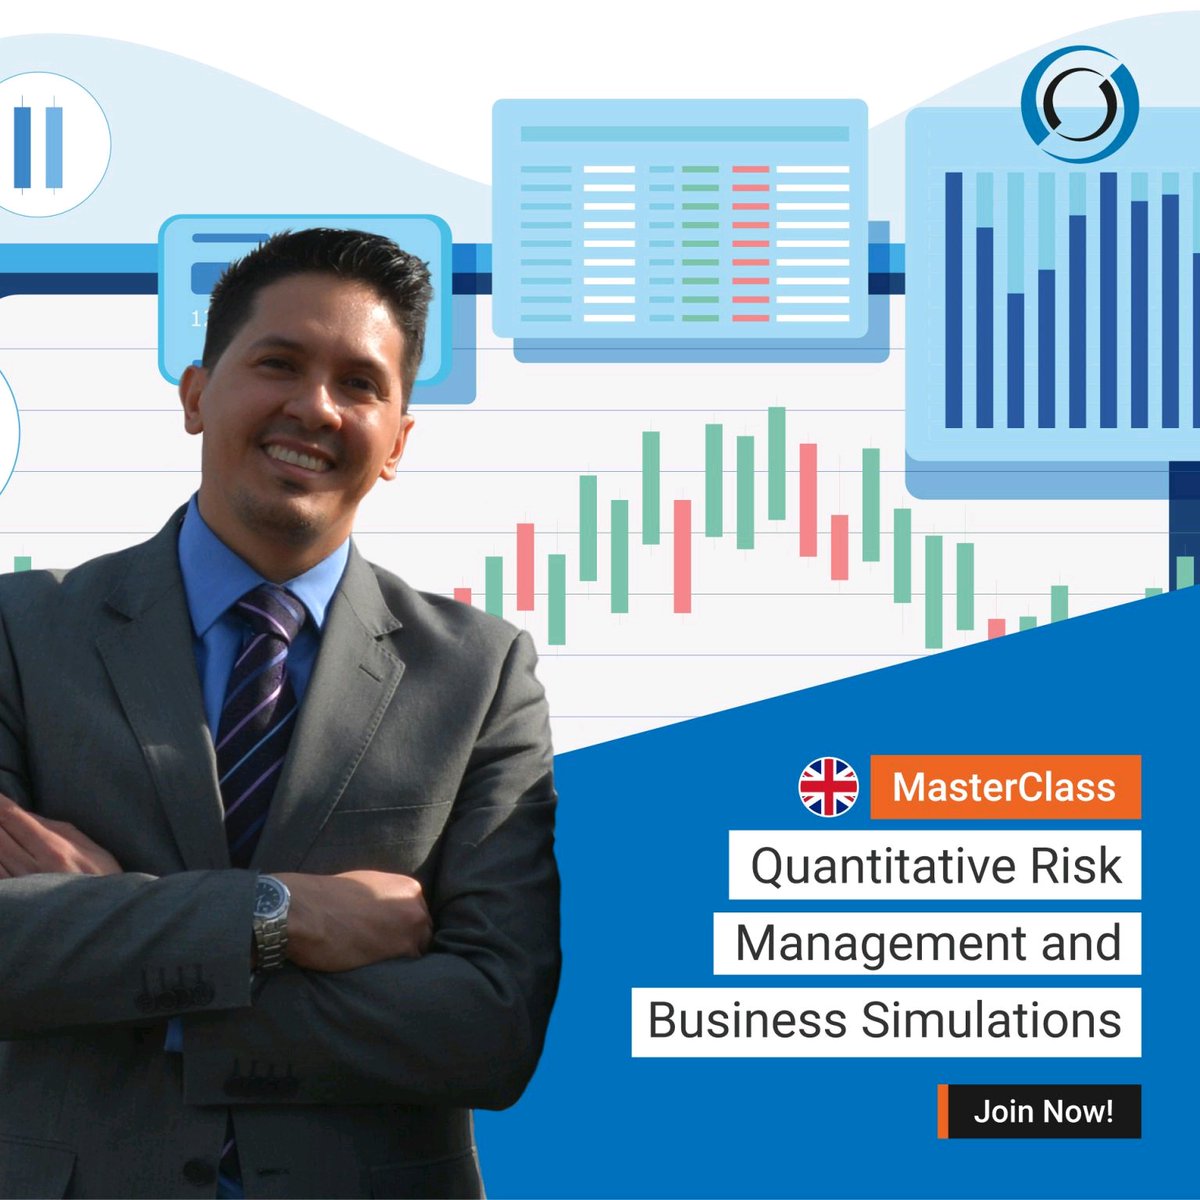 @oslriskmanage is hosting MasterClass - ✈🚀 #QuantitativeRiskManagement and #BusinessSimulations. Would you like to attend? Register here: lnkd.in/d-WGVcB | #postcovidrecovery #dataanalytics #riskmanagement #professionaldevelopment #GRC #Risk #compliance